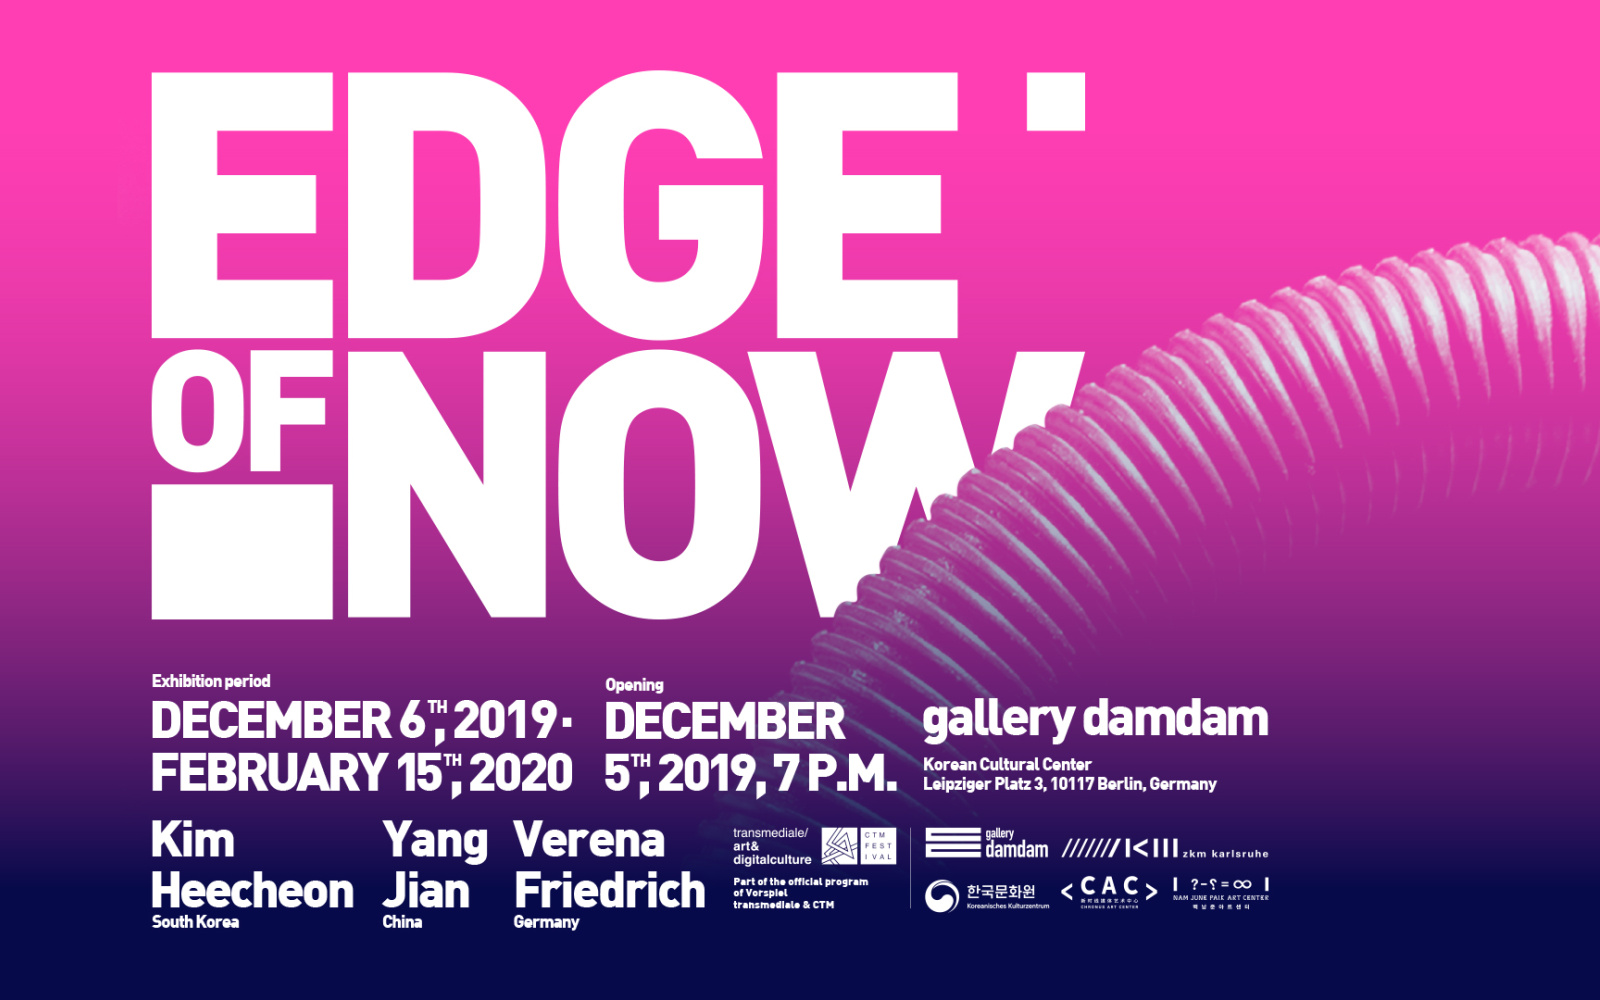 Poster of the exhibition »Edge of Now« with the lettering in white against a pink background.